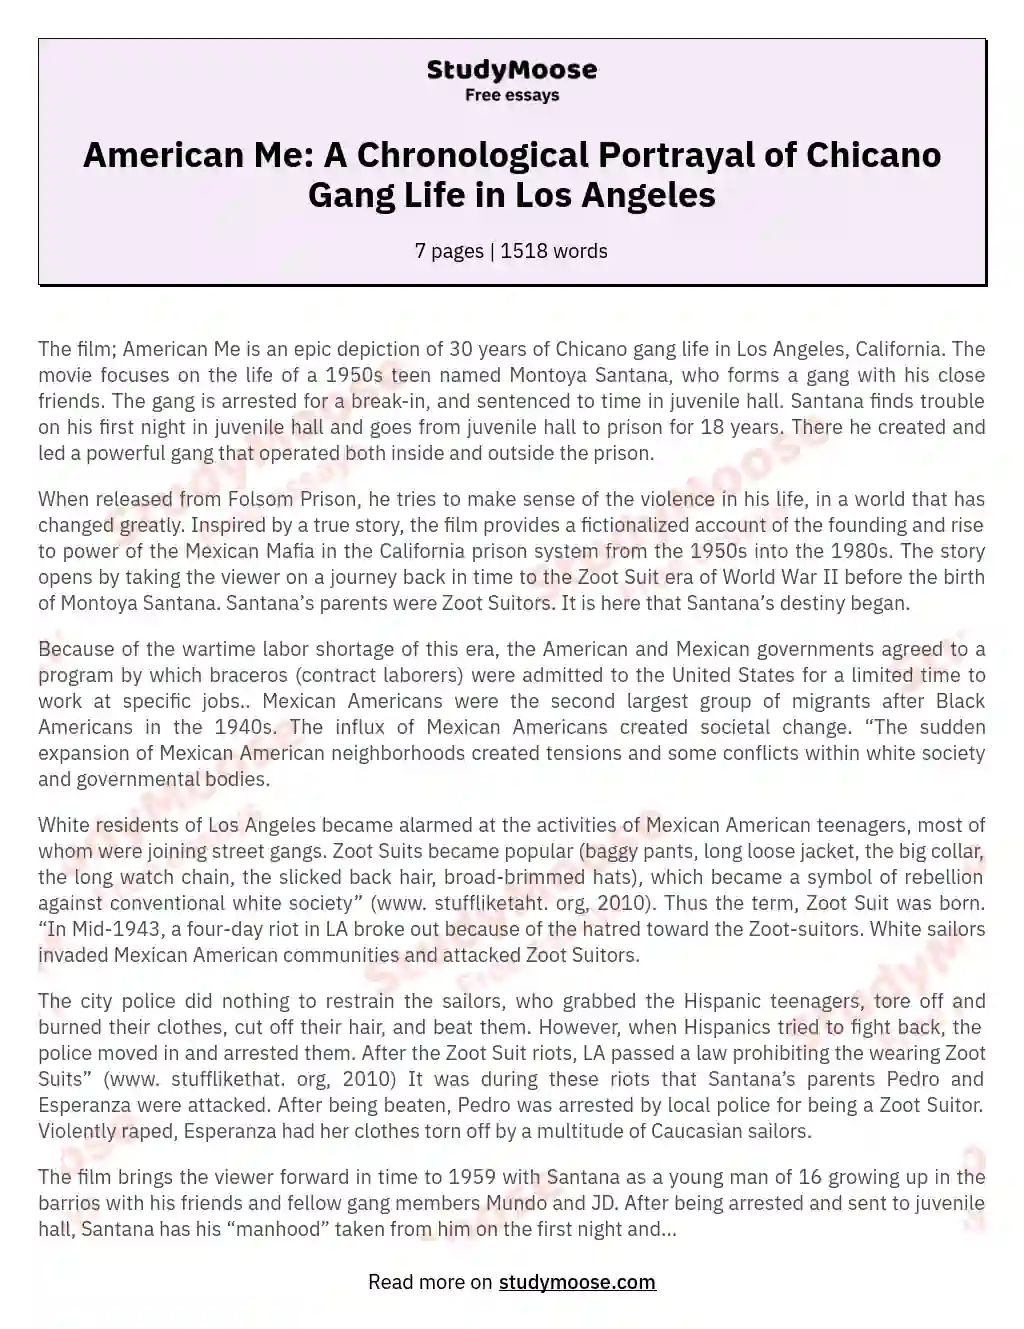 Chicano Gang Life in Los Angeles: A Historical Perspective essay